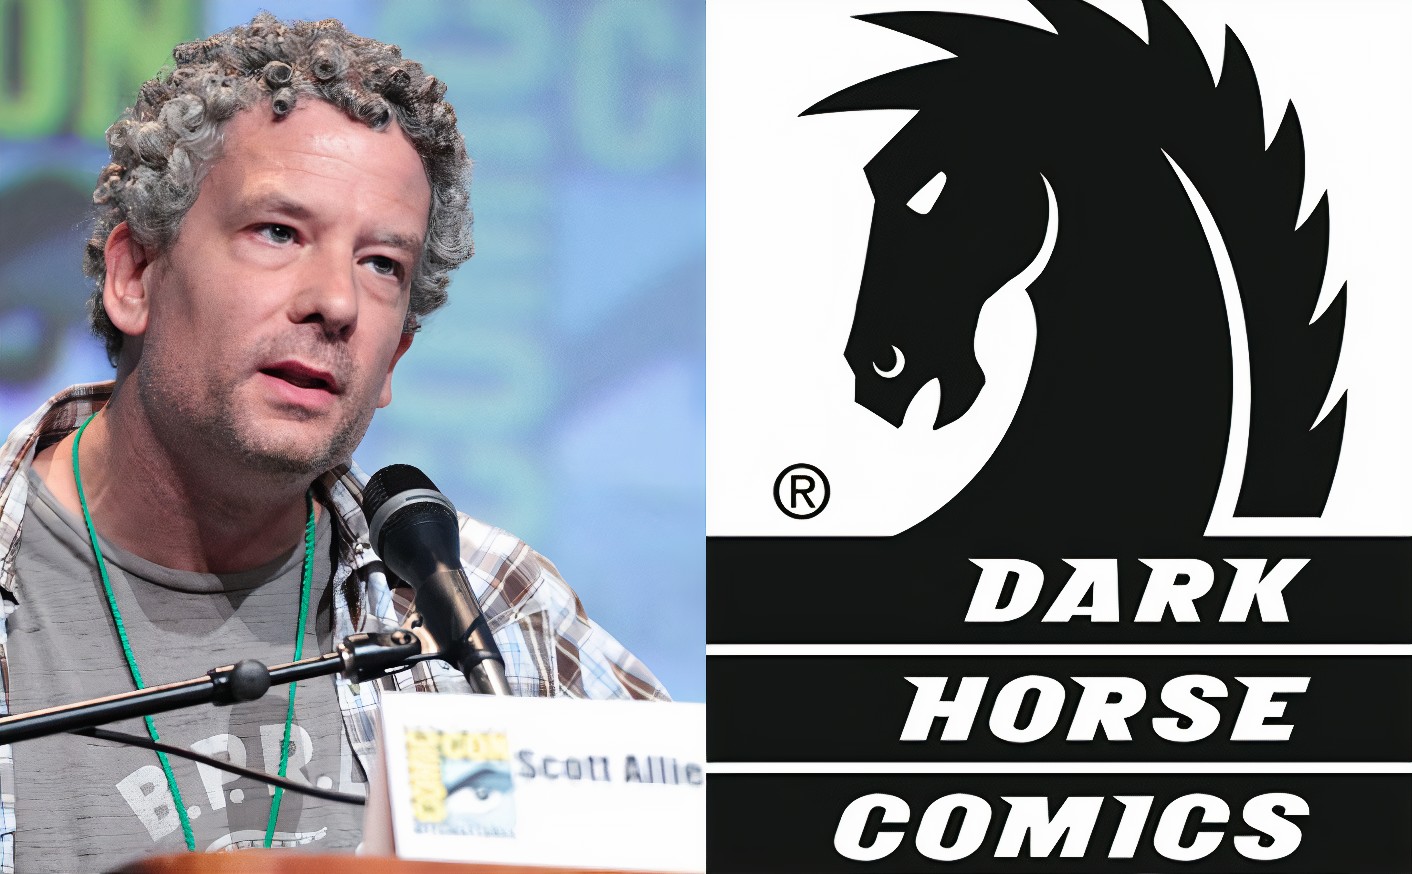 Dark Horse Comics cuts ties with editor Scott Allie following sexual assault claims